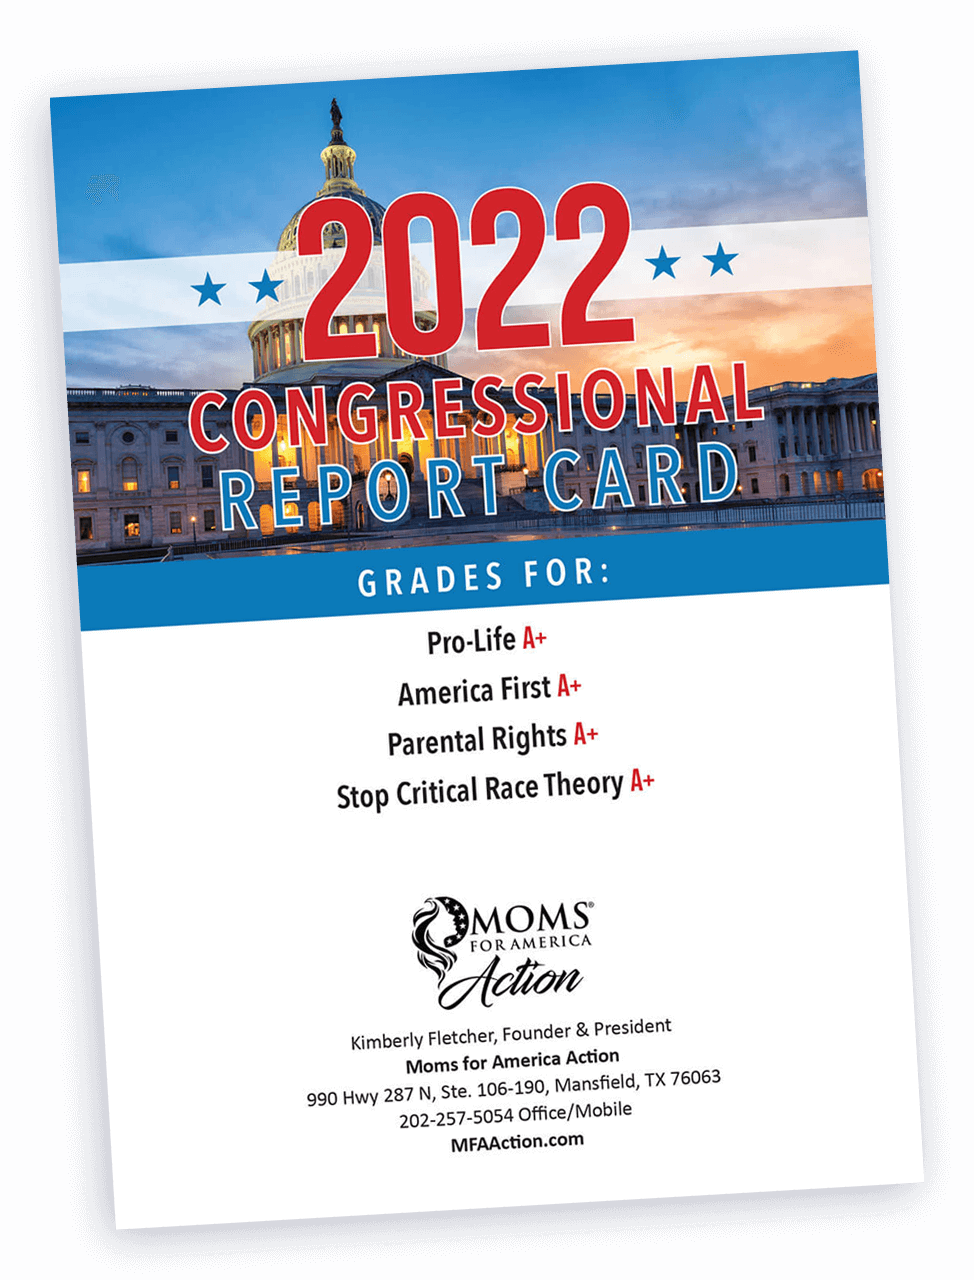 2022 Moms for America Congressional Report Card